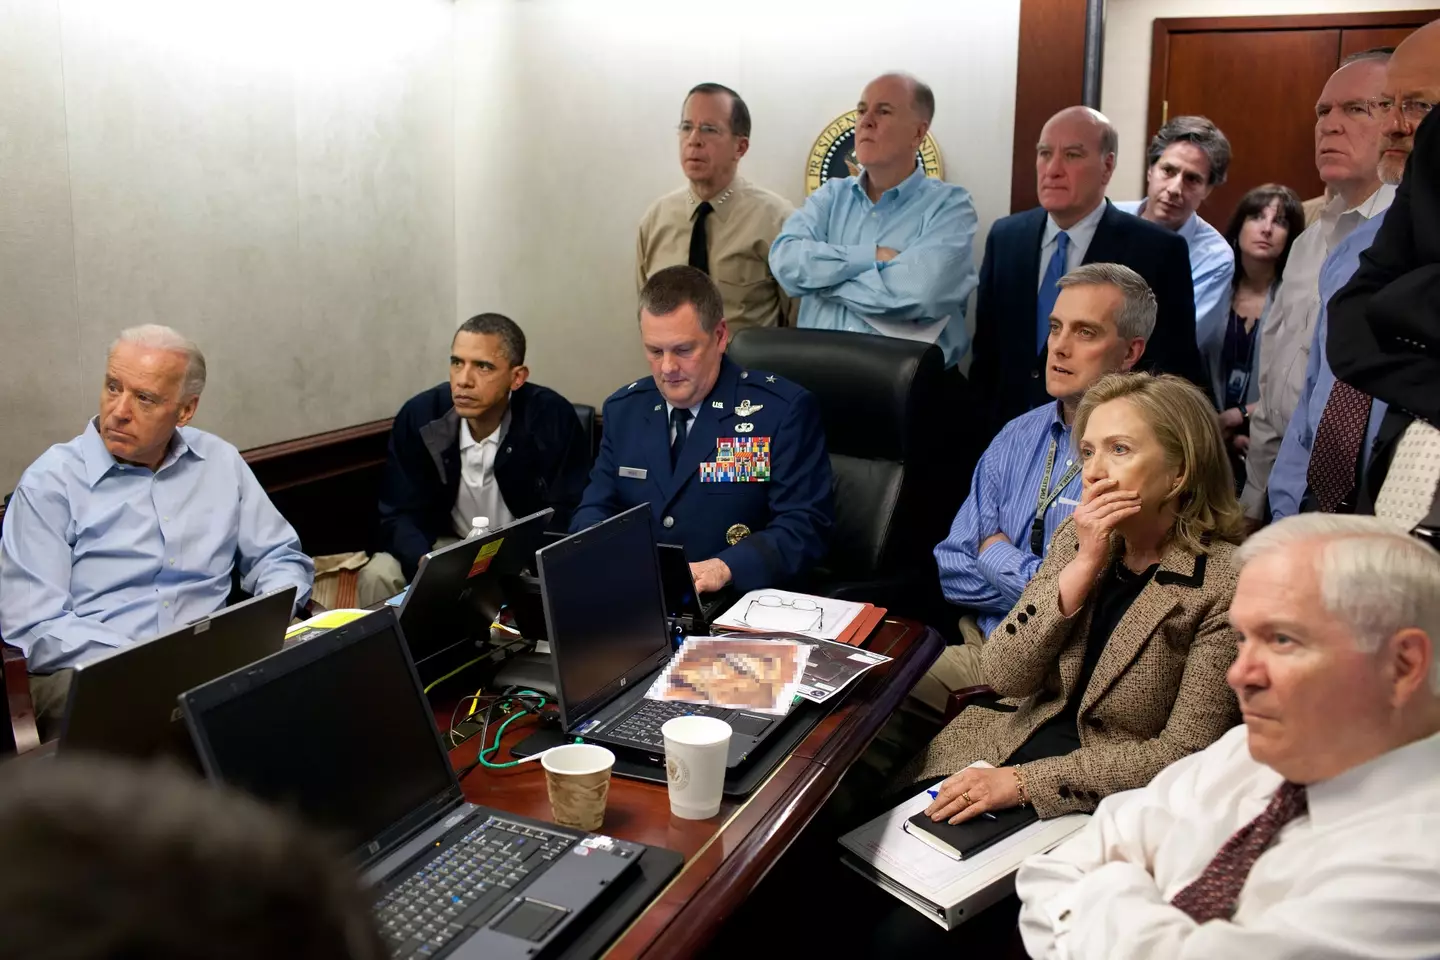 Then-president Barack Obama announced the news of Bin Laden's death.